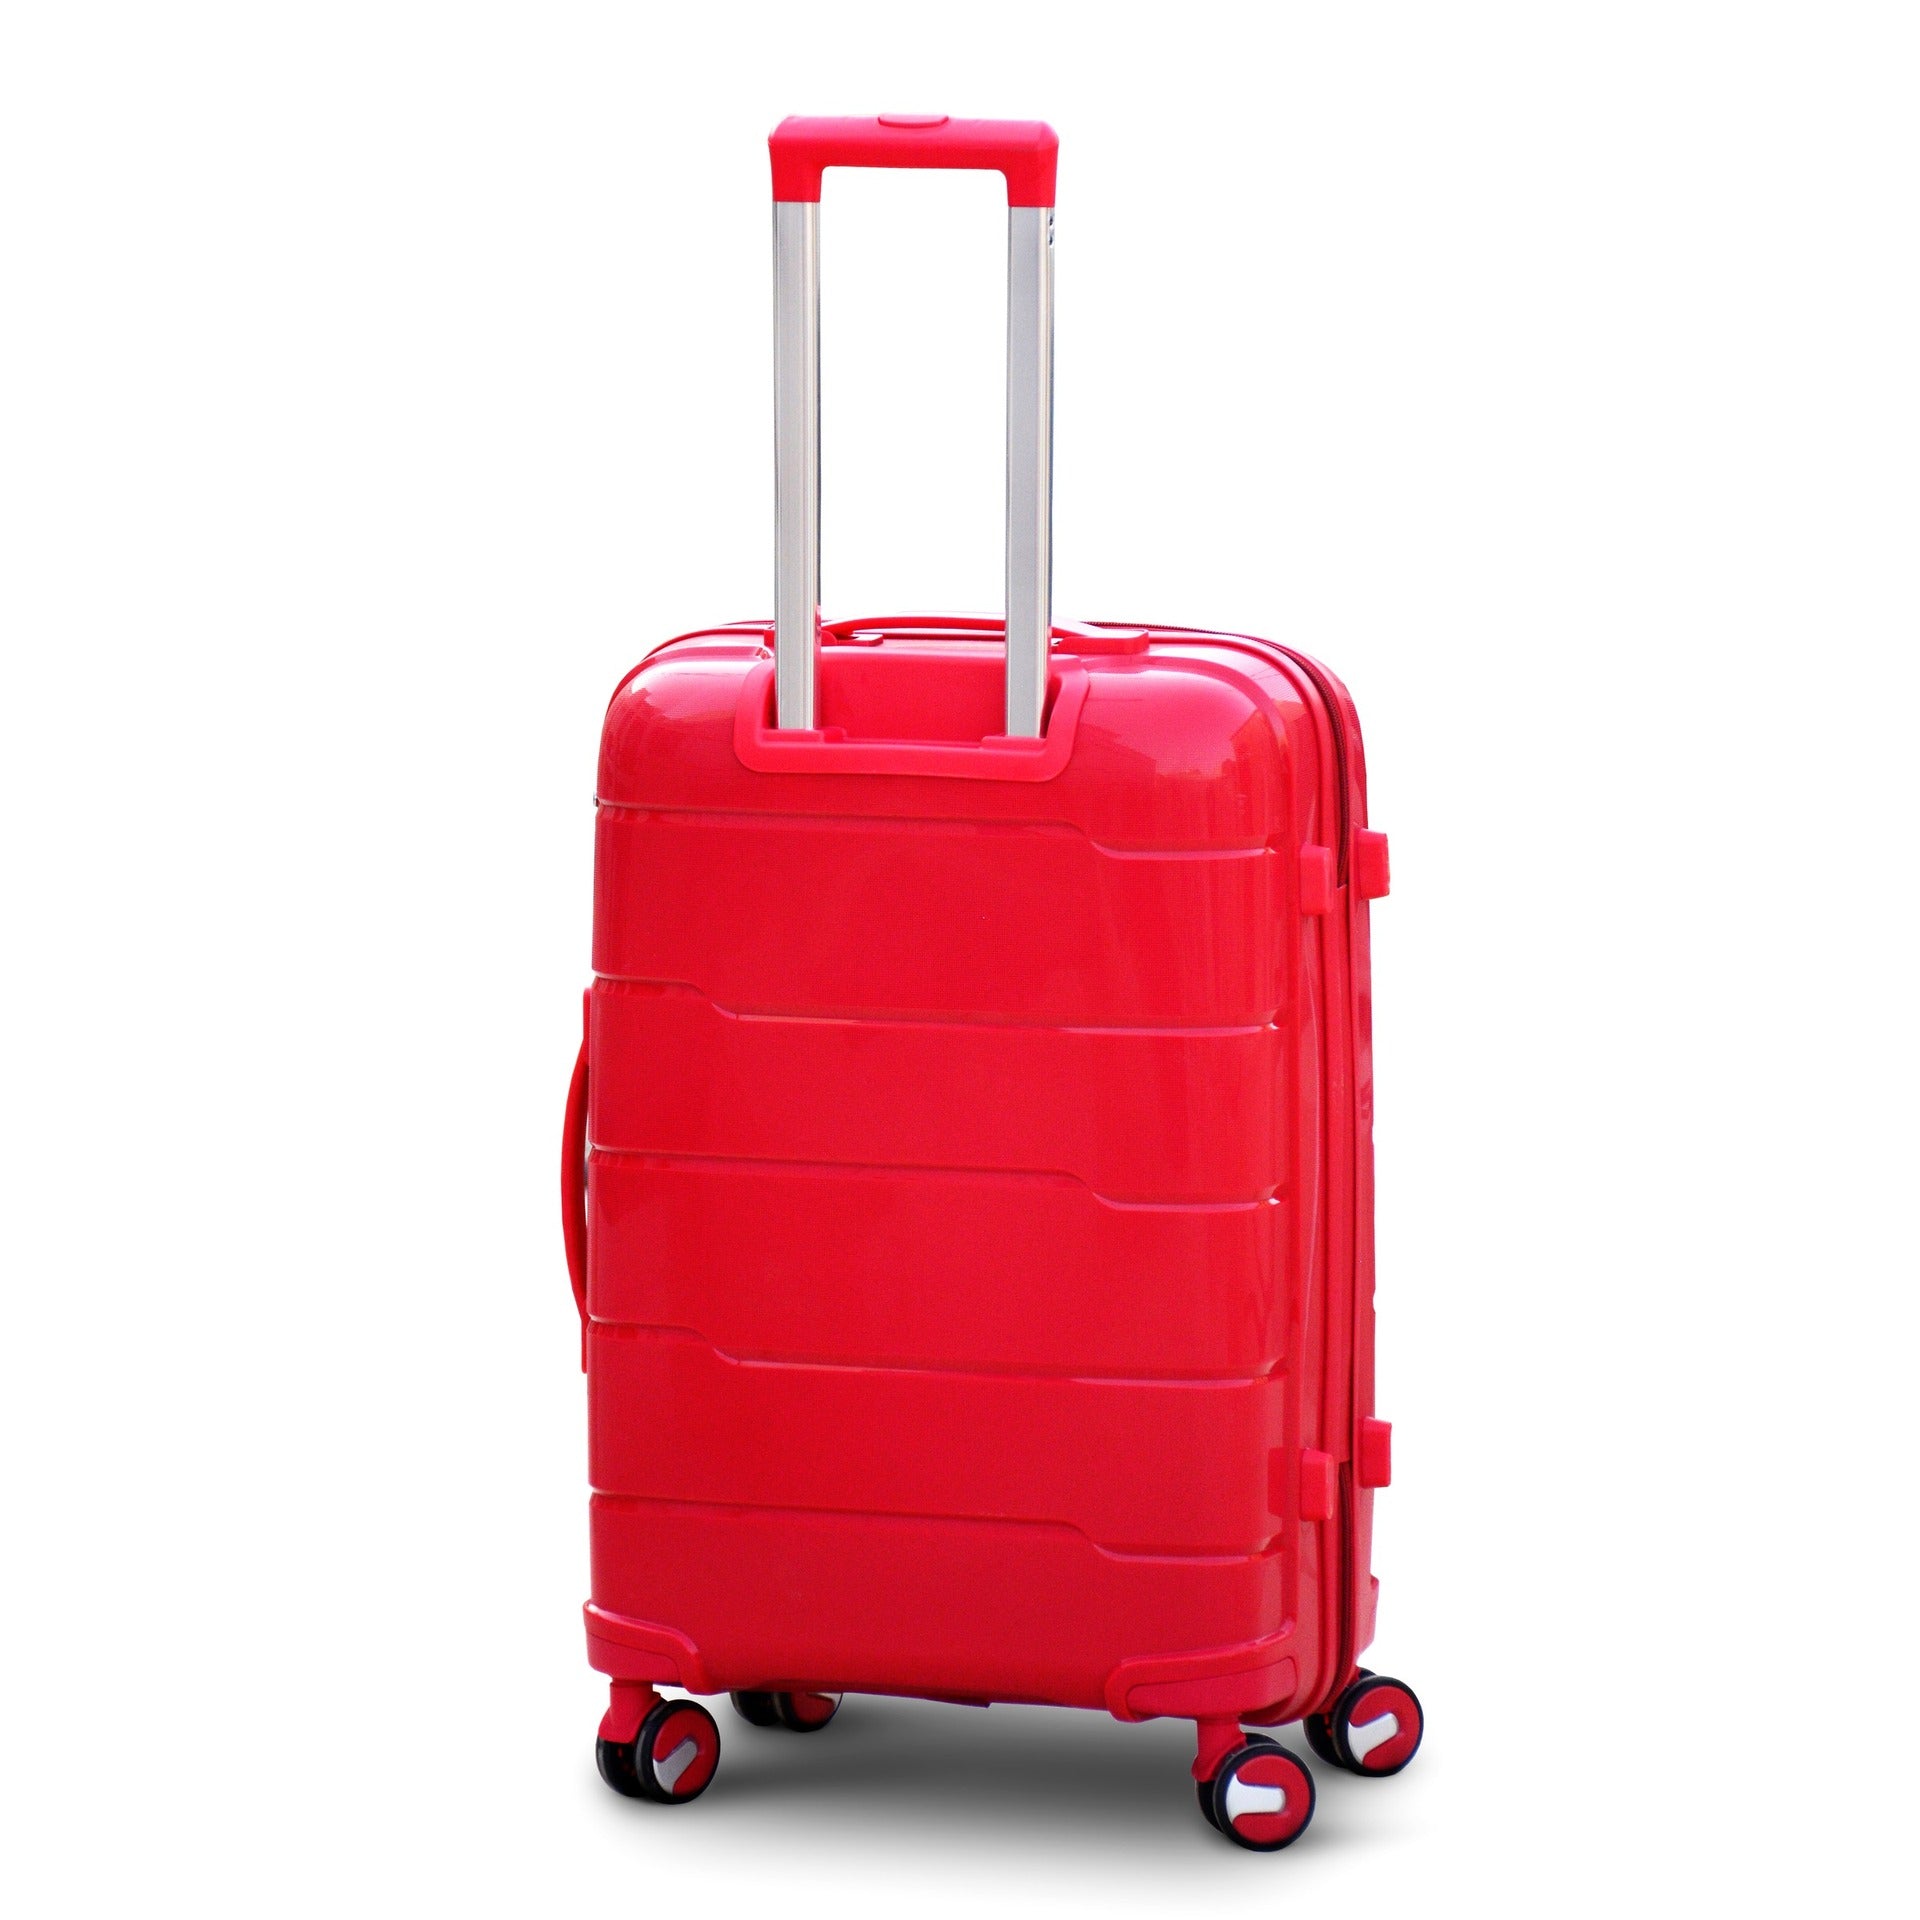 28" Red Colour Ceramic smooth PP Lightweight Luggage Bag with Double Spinner Wheel